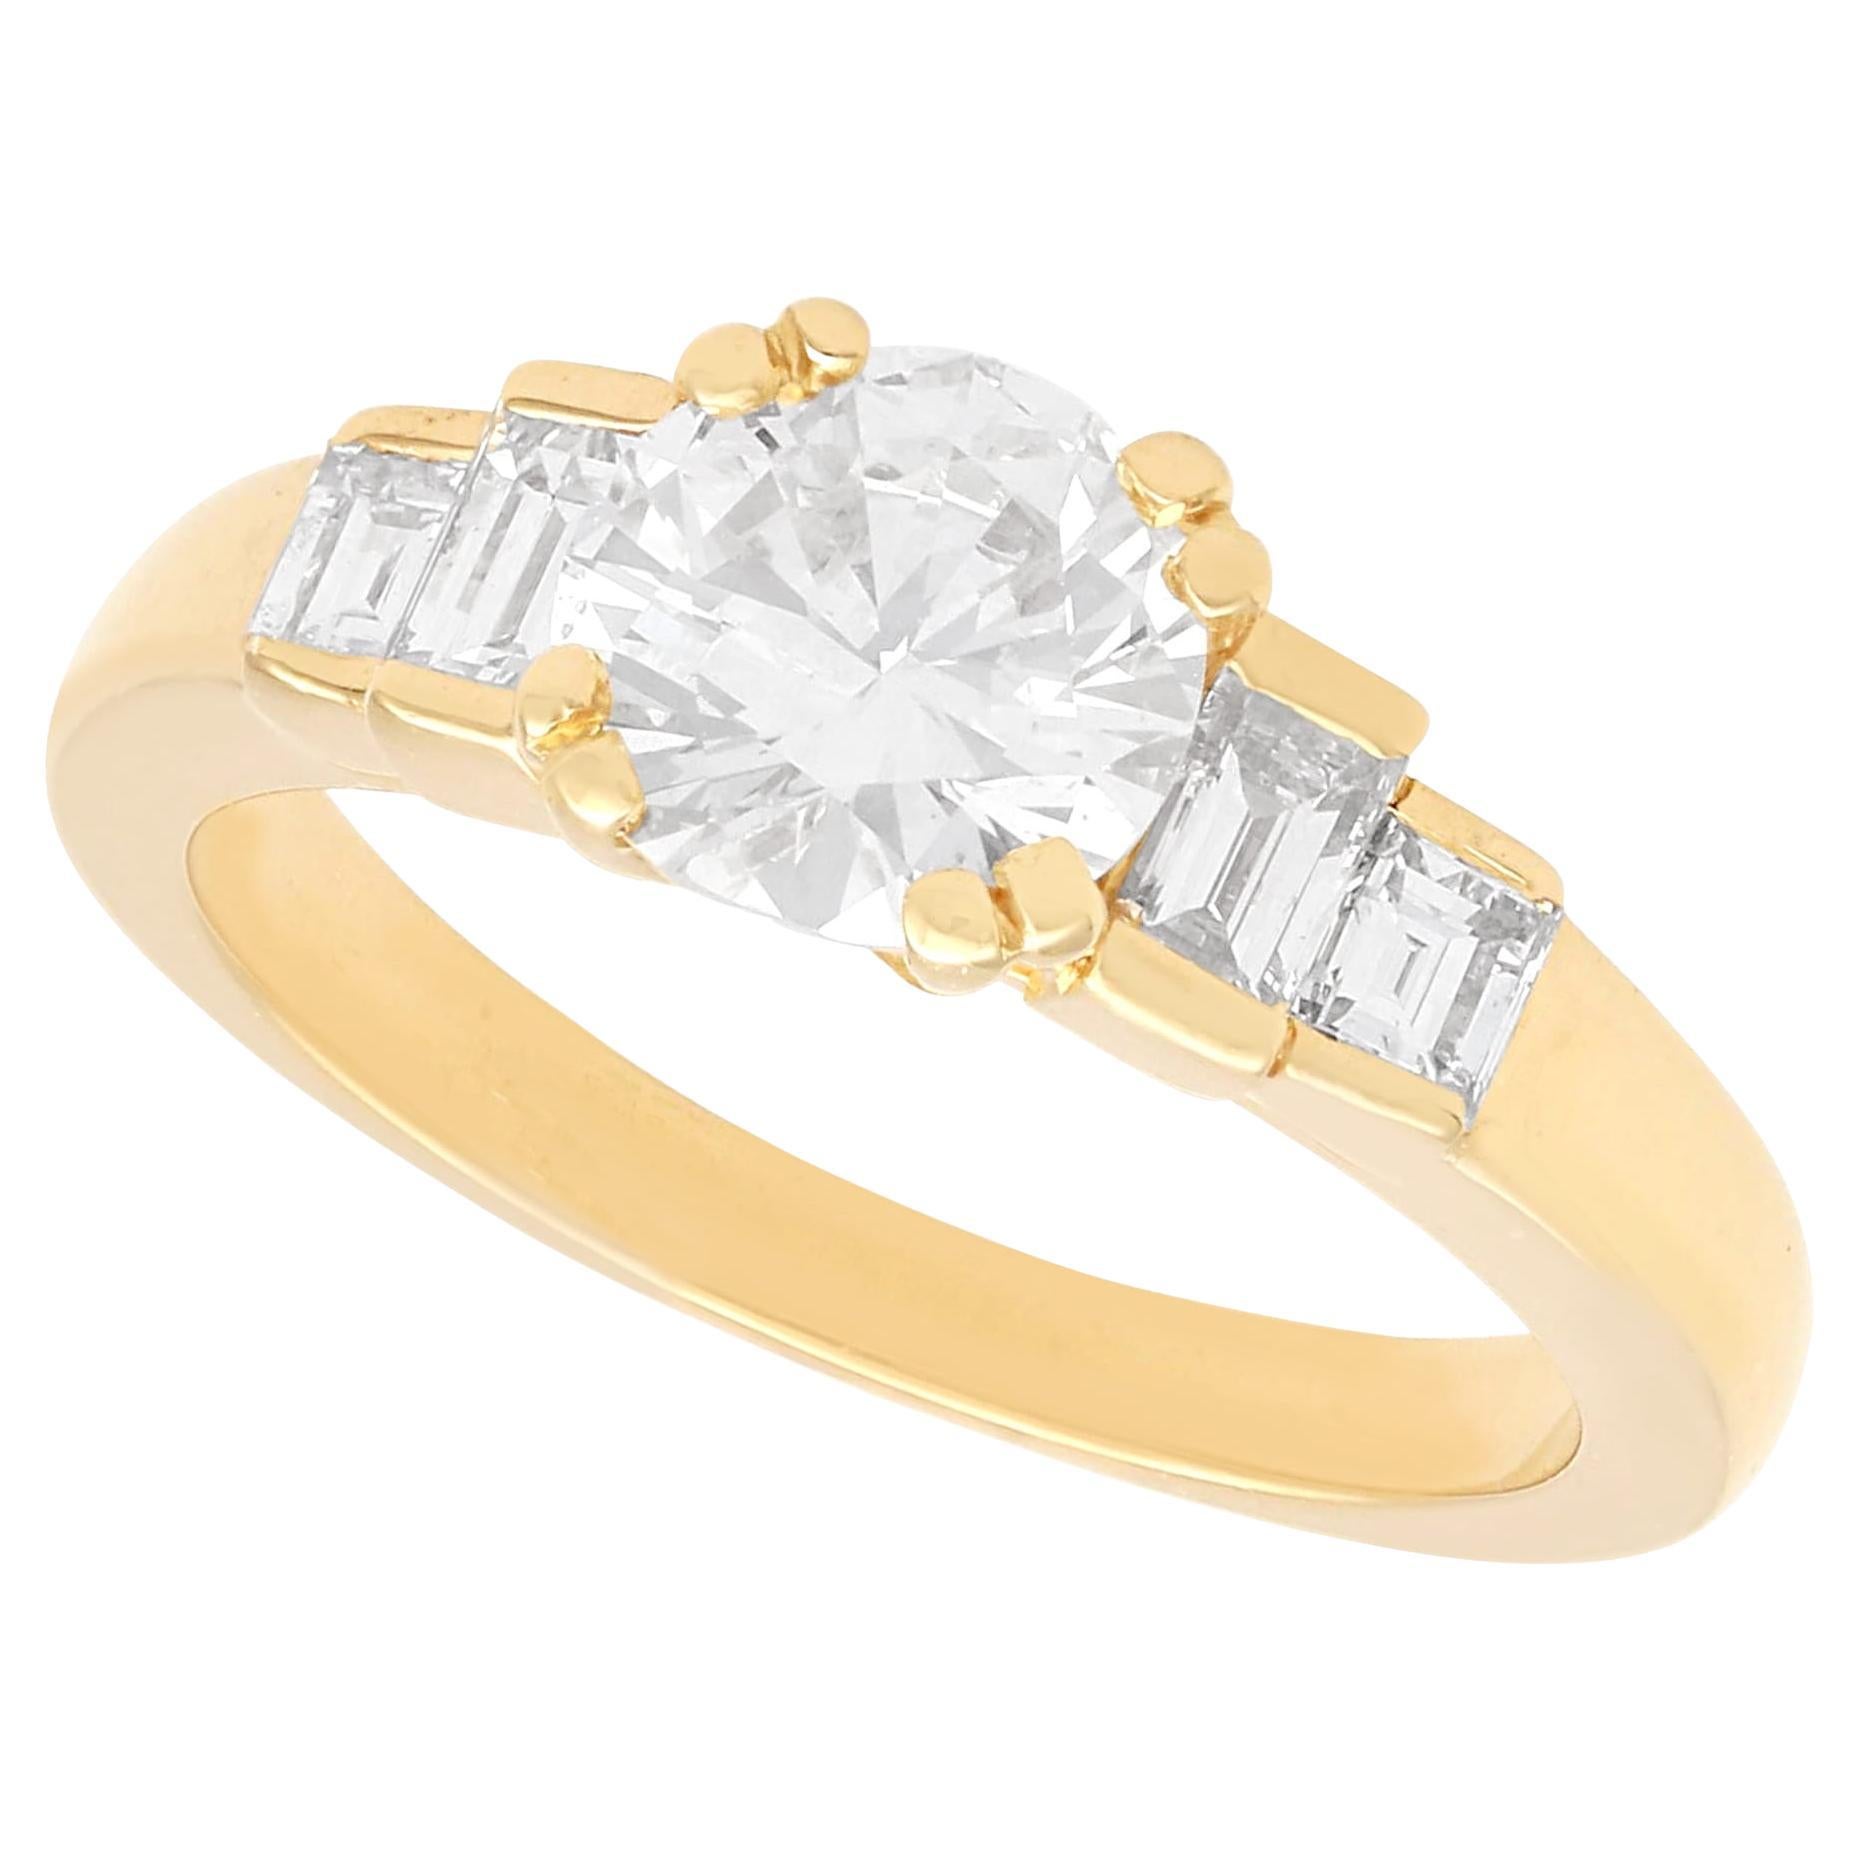 Vintage French 1.38 Carat Diamond and Yellow Gold Solitaire Ring For Sale